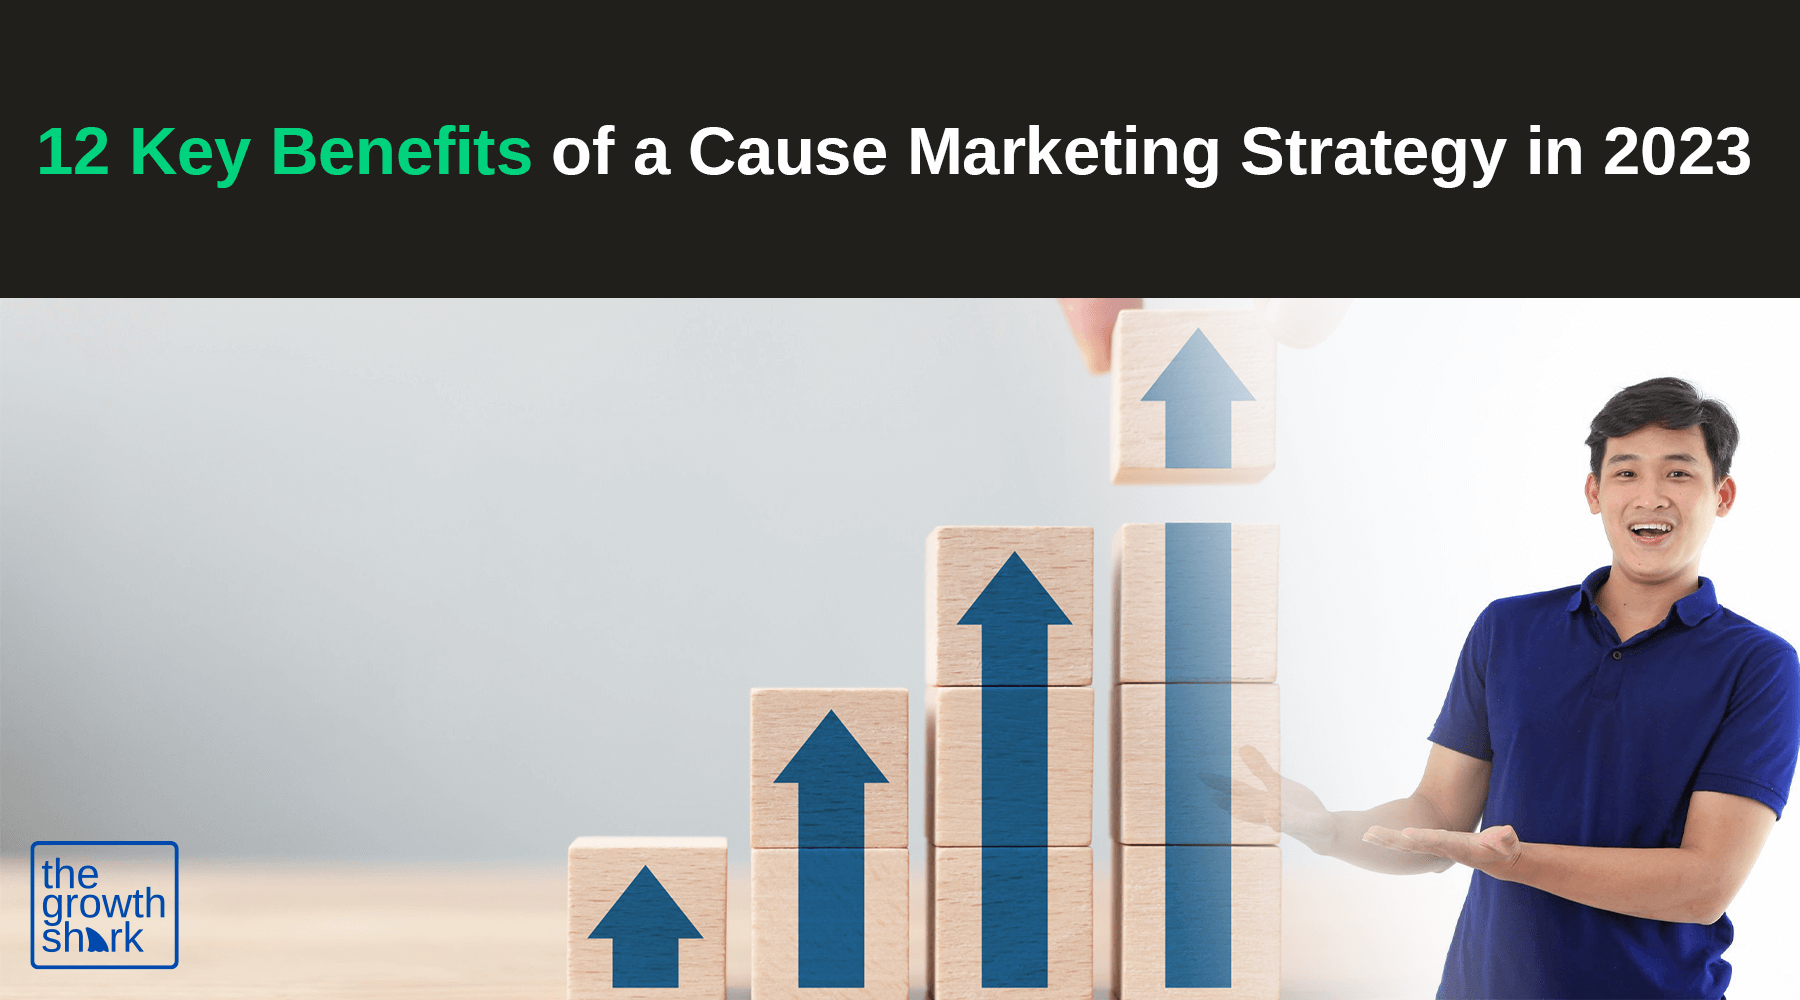 Discover 12 reasons you need a digital marketing strategy for your cause-related campaigns and purpose-driven business in 2023